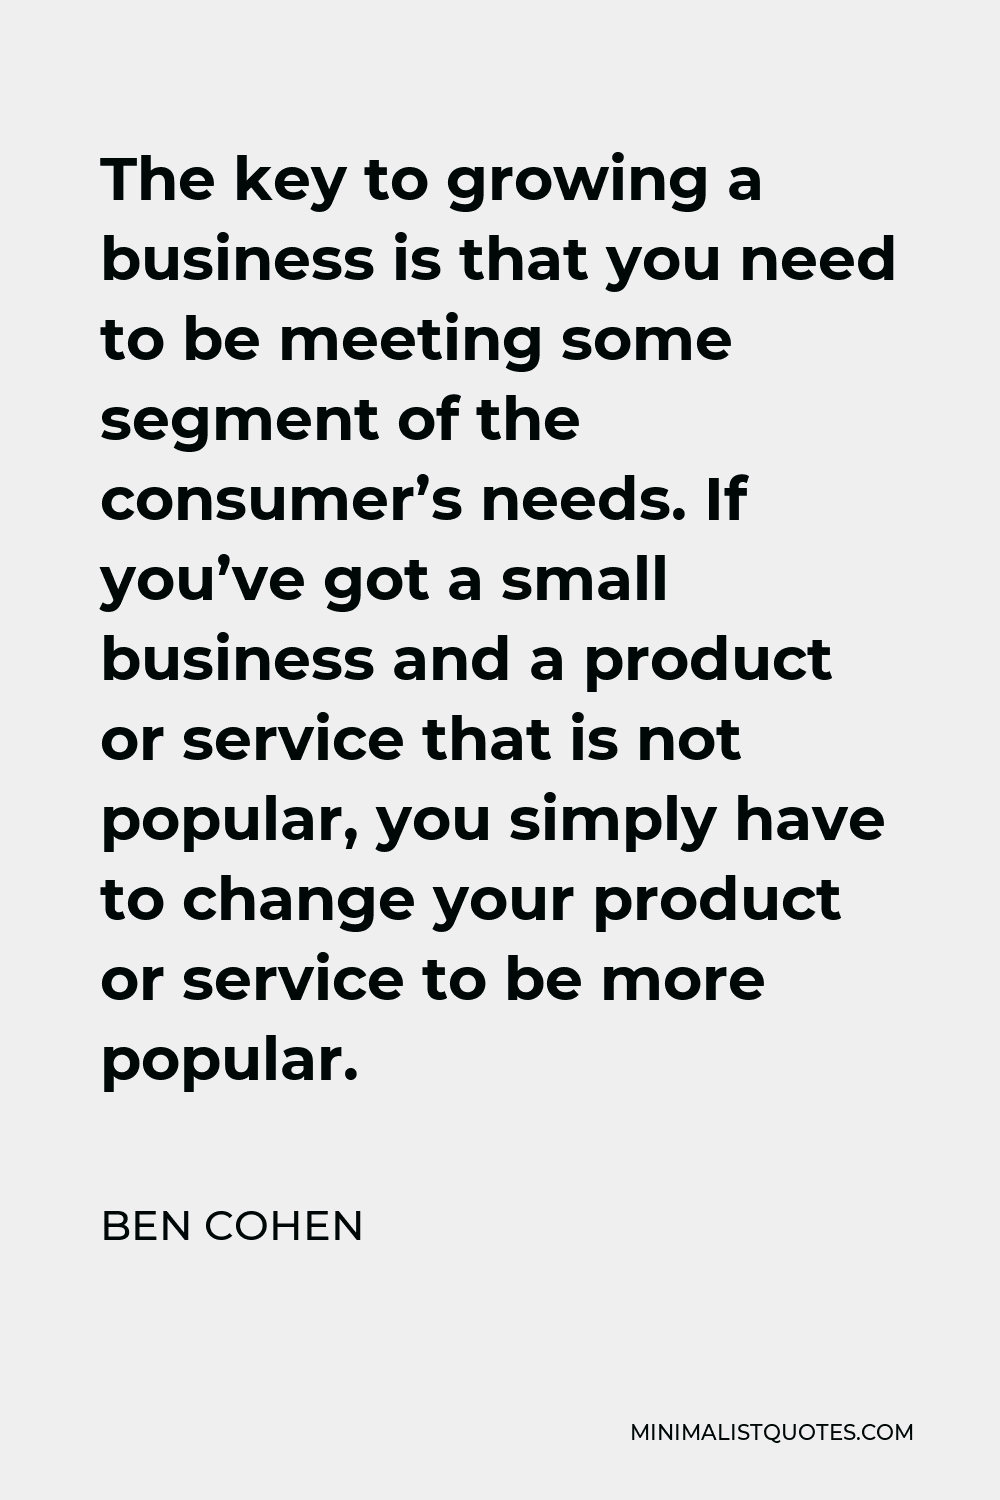 Ben Cohen Quote - The key to growing a business is that you need to be meeting some segment of the consumer’s needs. If you’ve got a small business and a product or service that is not popular, you simply have to change your product or service to be more popular.